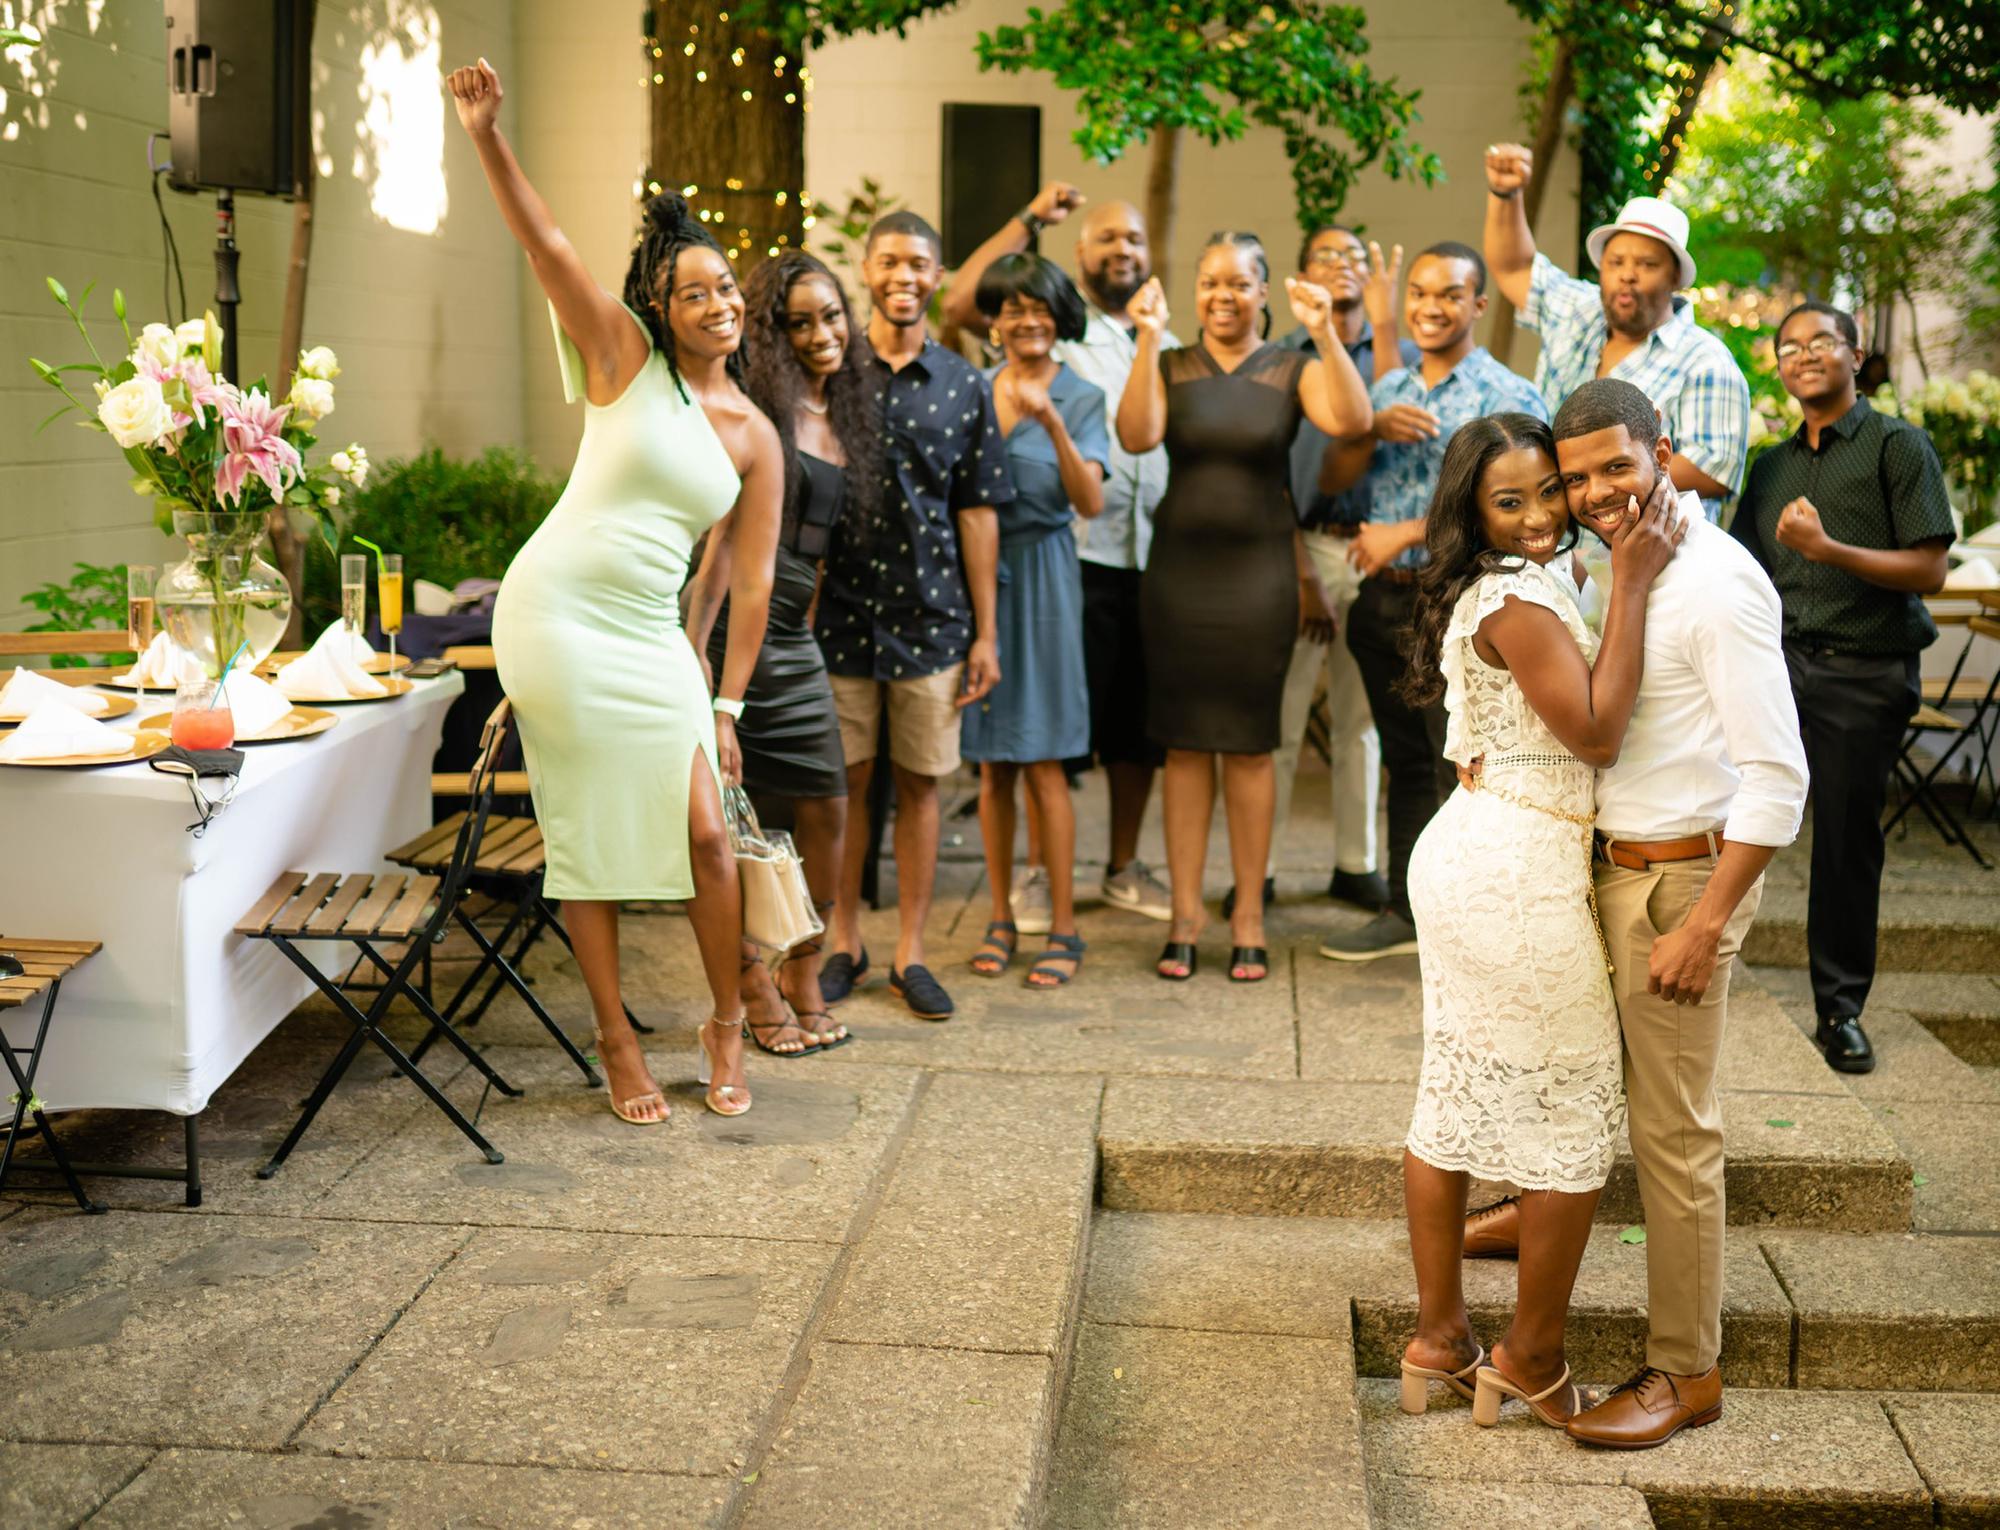 Marcus’ Family at The Engagement Party